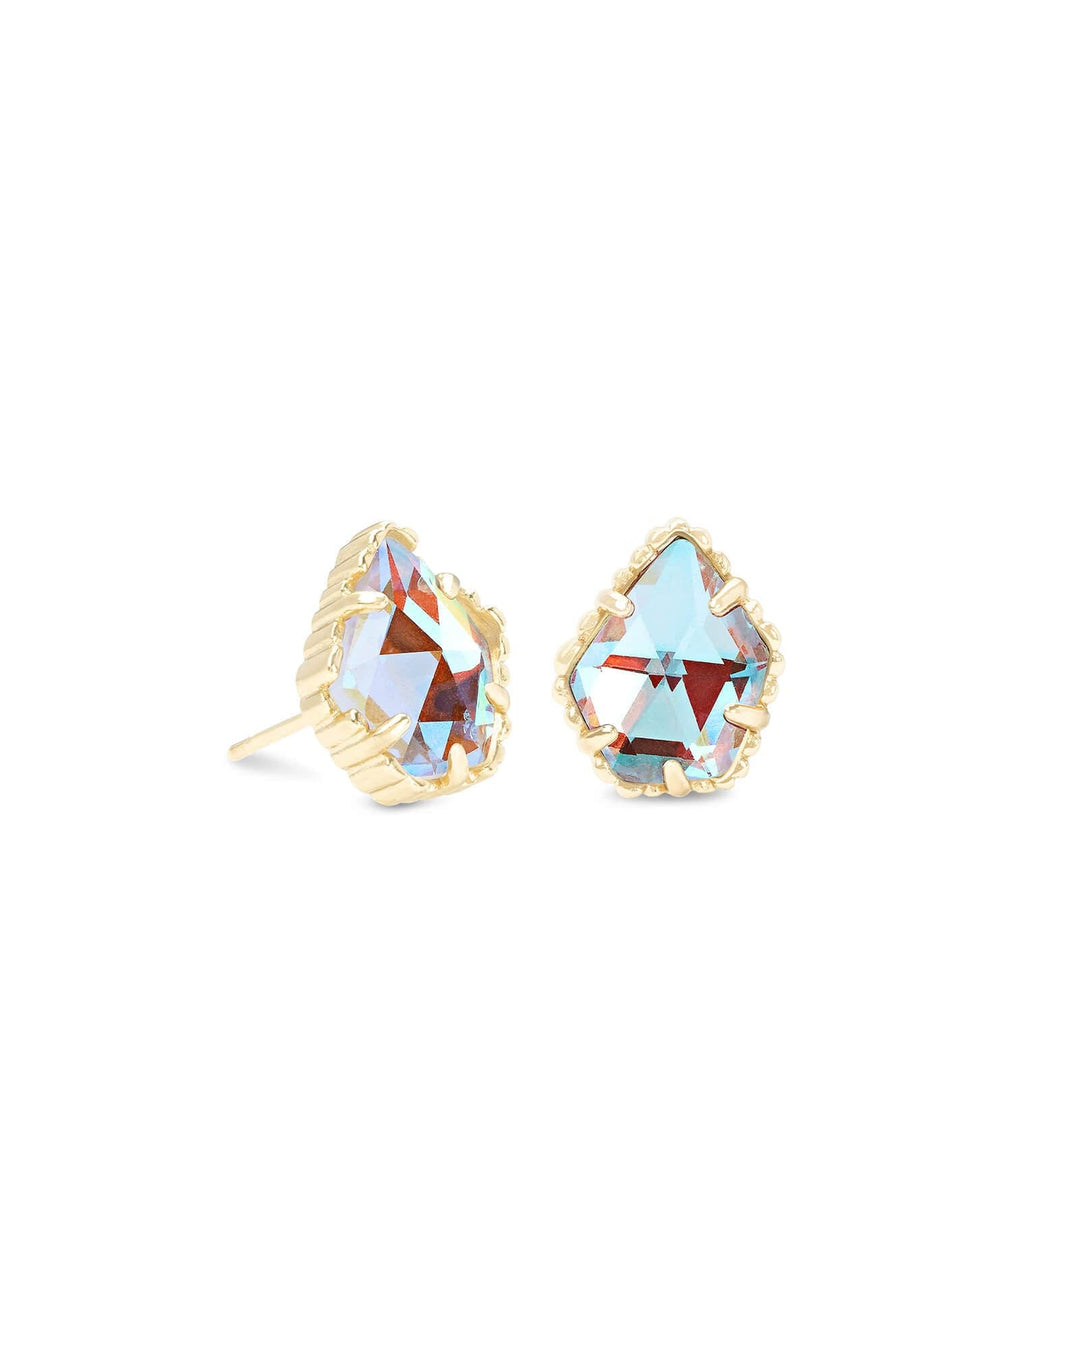 Tessa Gold Stud Earrings in Dichroic Glass - Bliss Boutique 